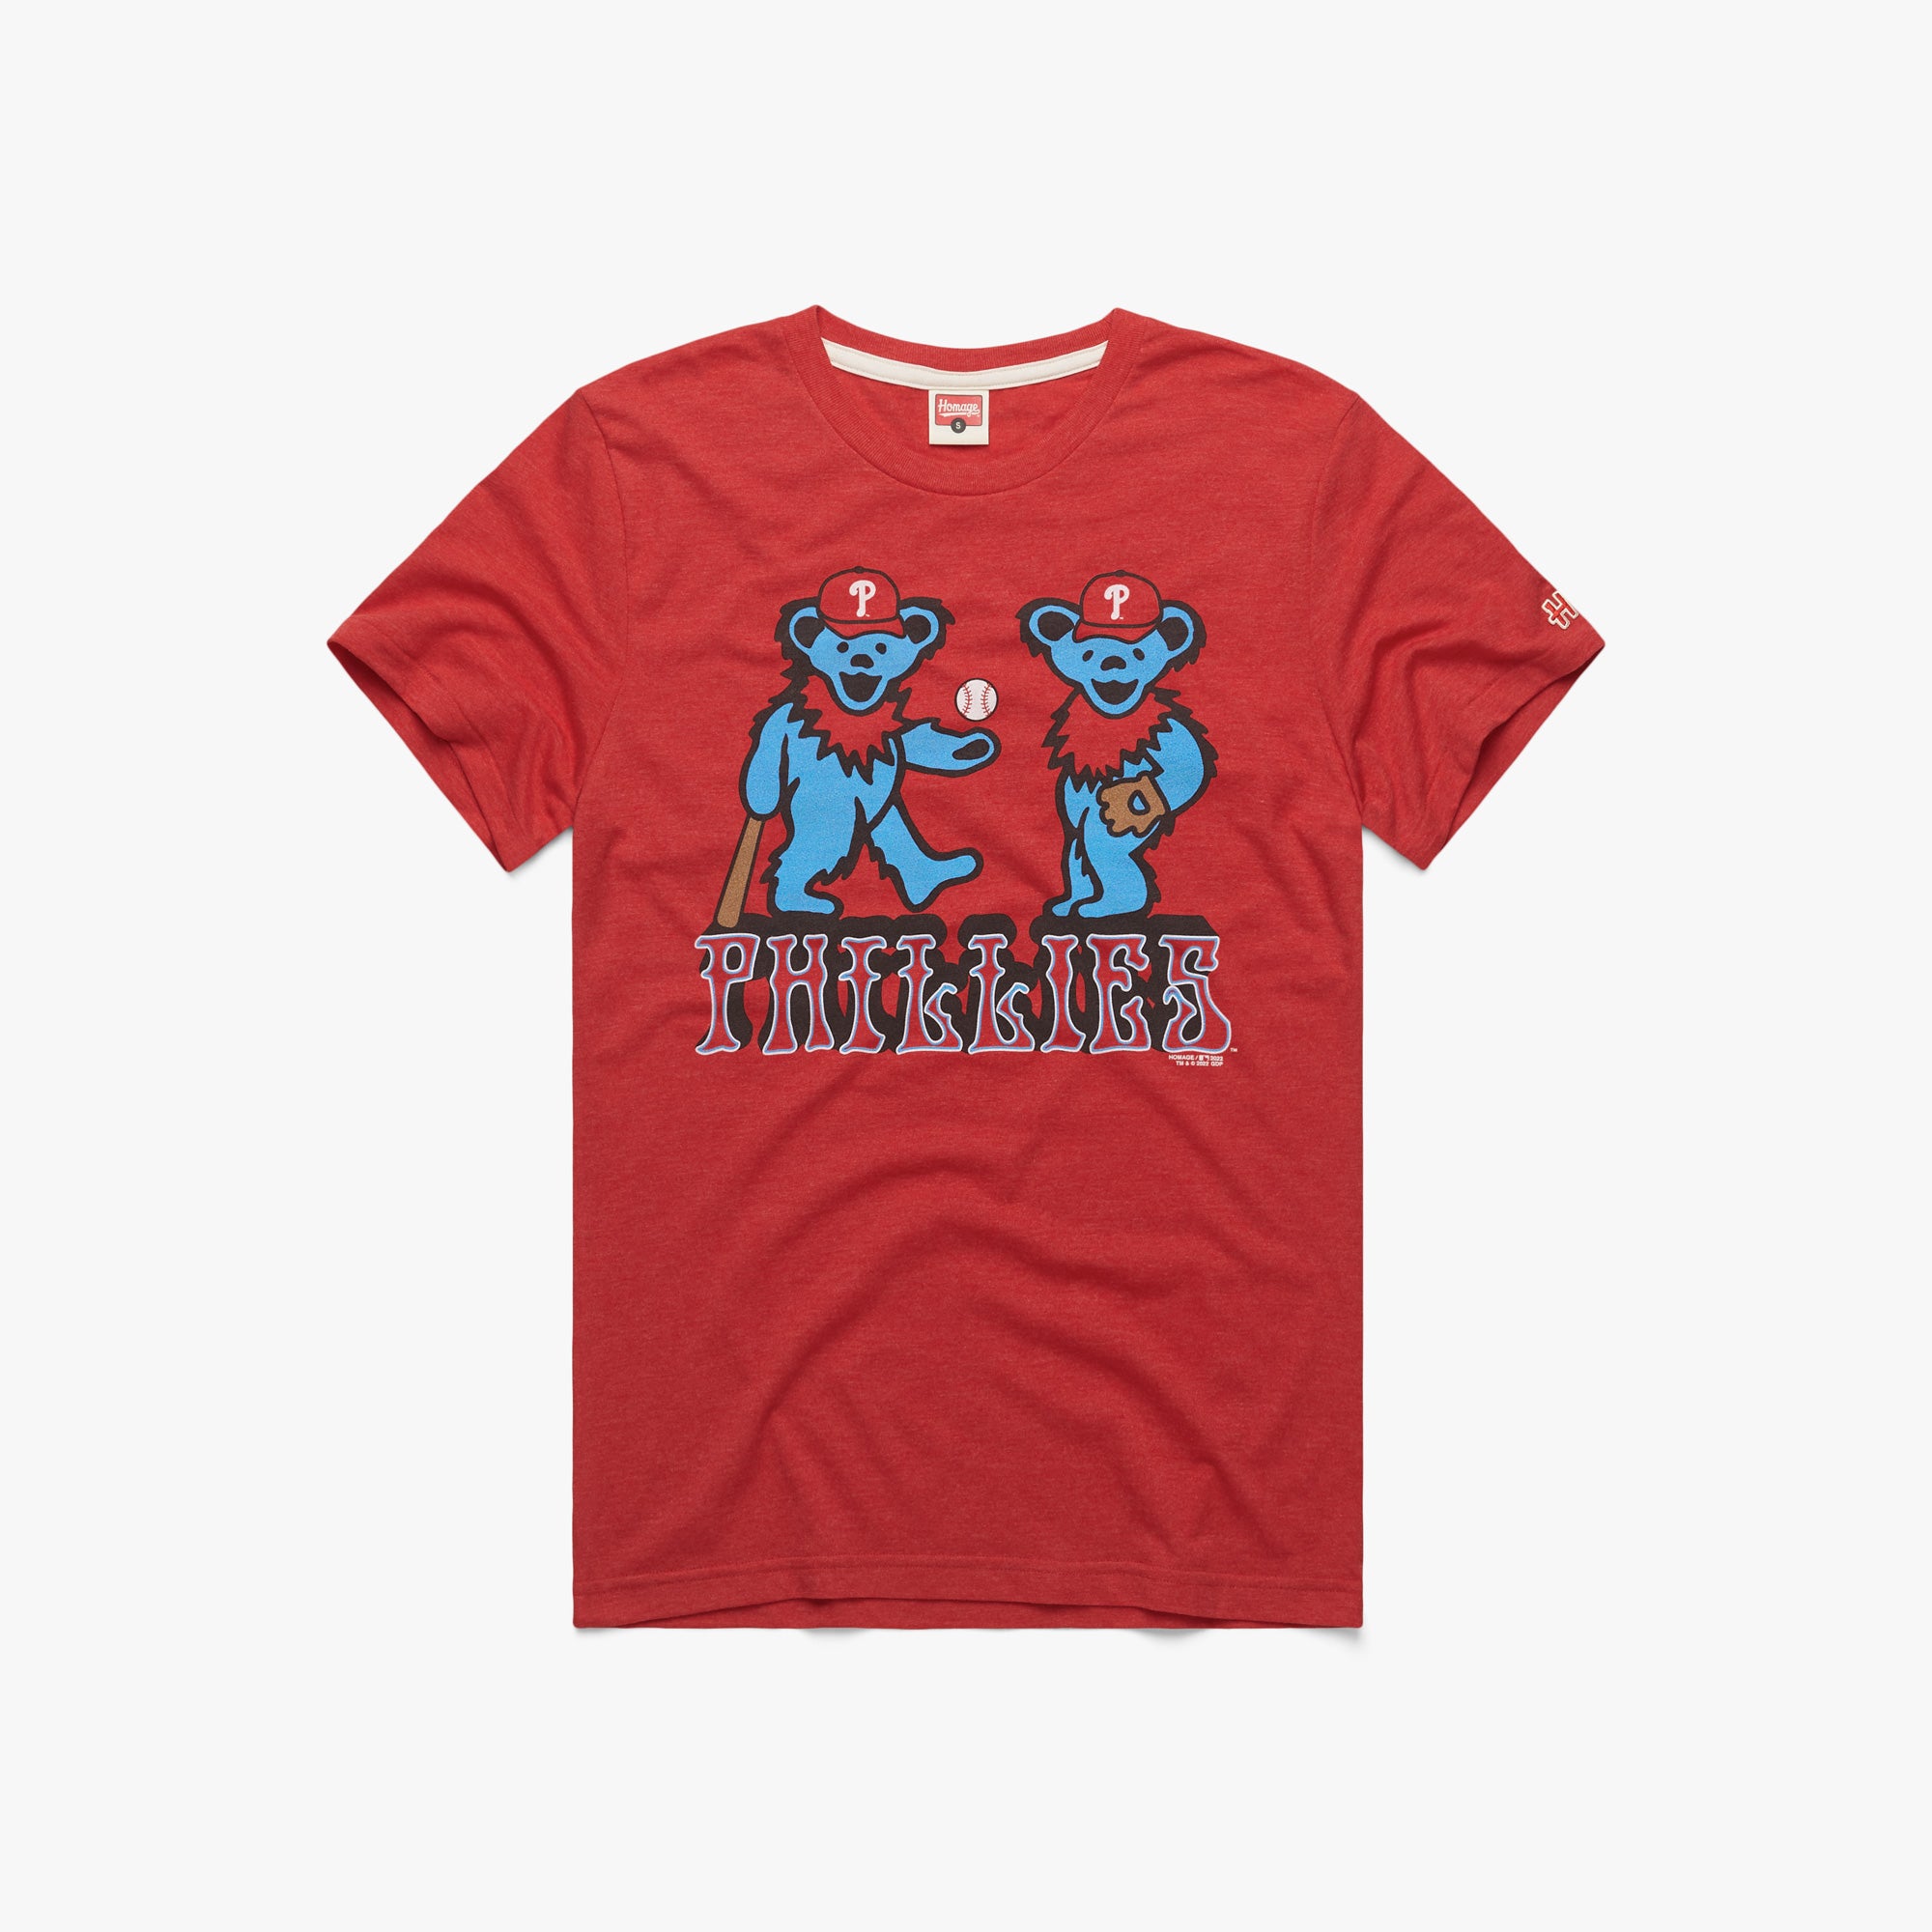 MLB x Grateful Dead x Mariners T-Shirt from Homage. | Grey | Vintage Apparel from Homage.